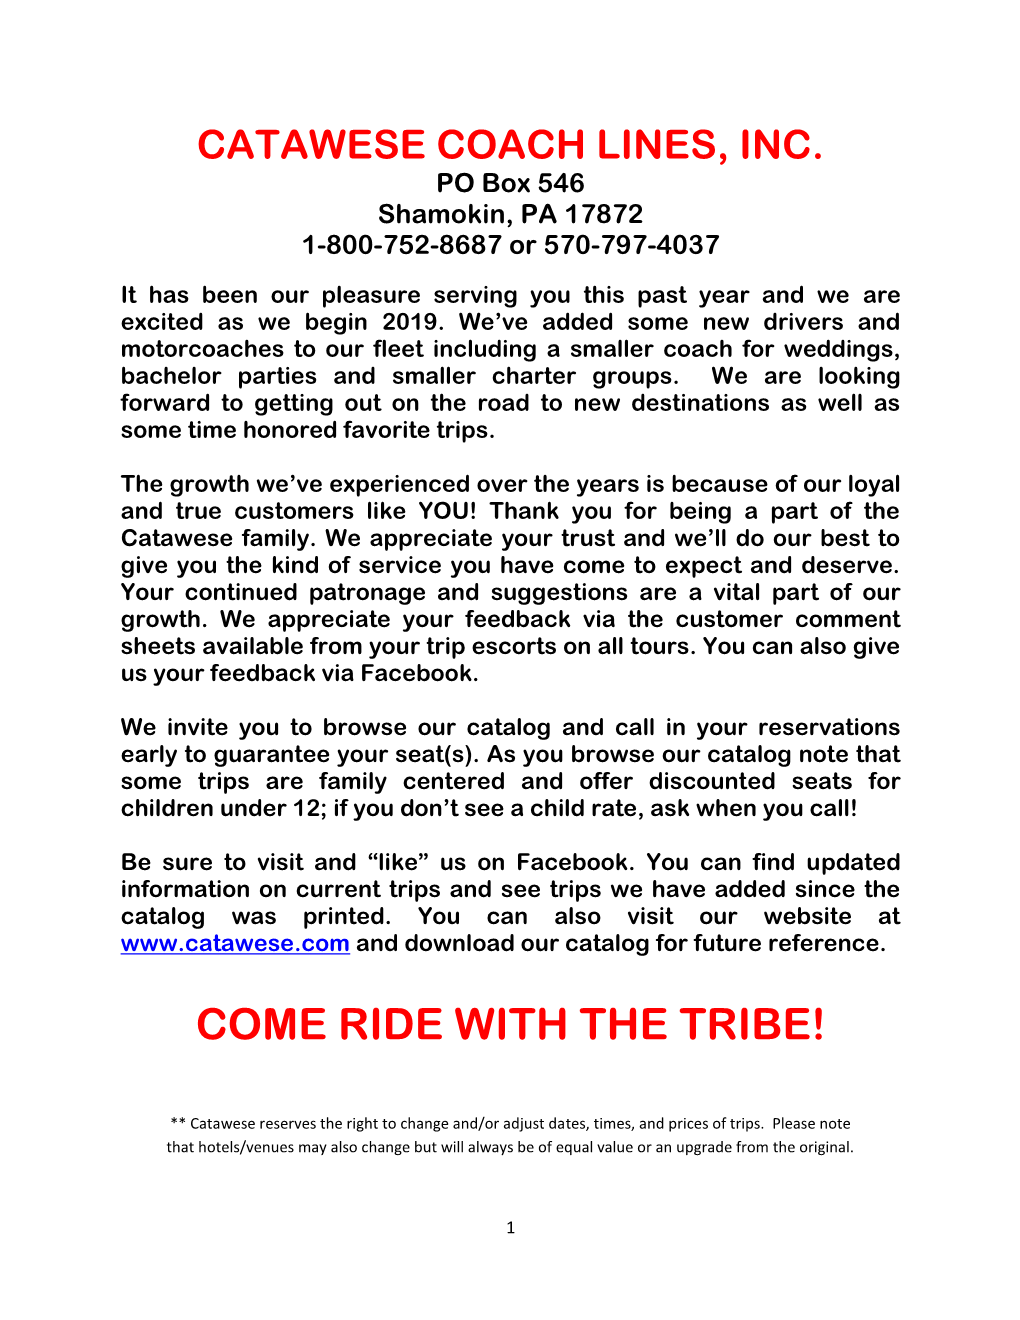 Come Ride with the Tribe!